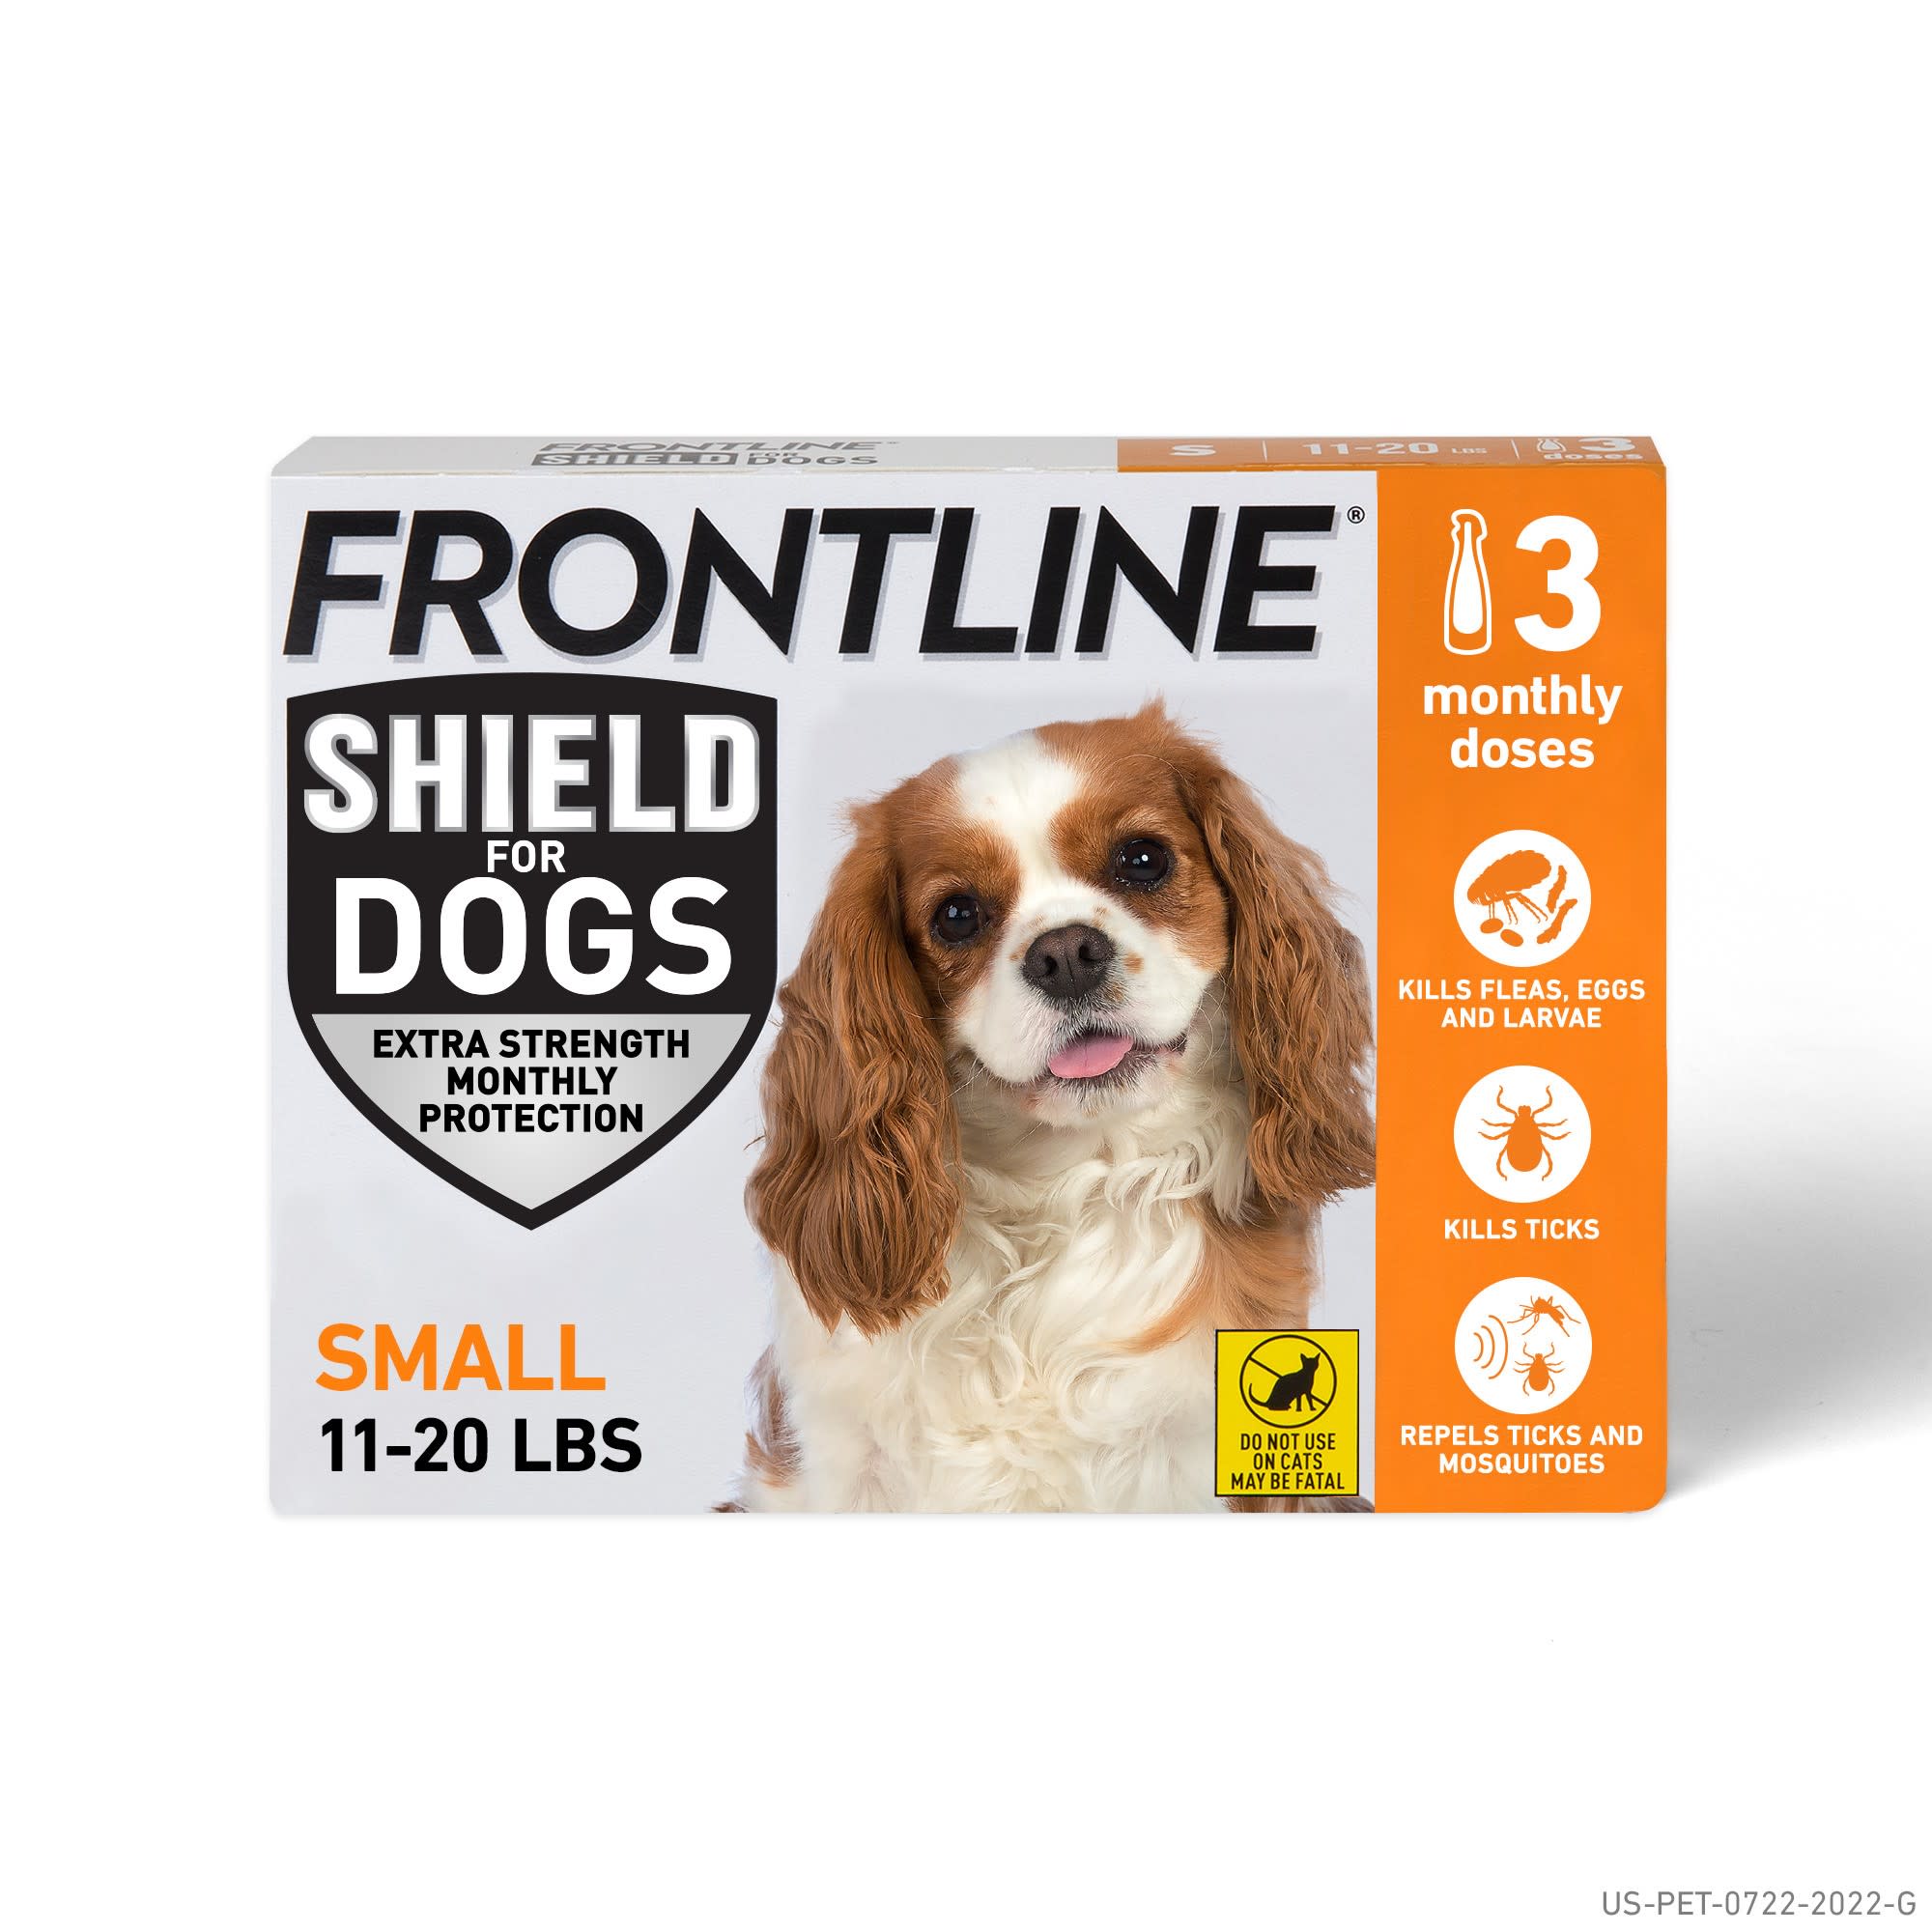 FRONTLINE Shield Flea & Tick Treatment for Small Dogs 11-20 lbs., Count of  3